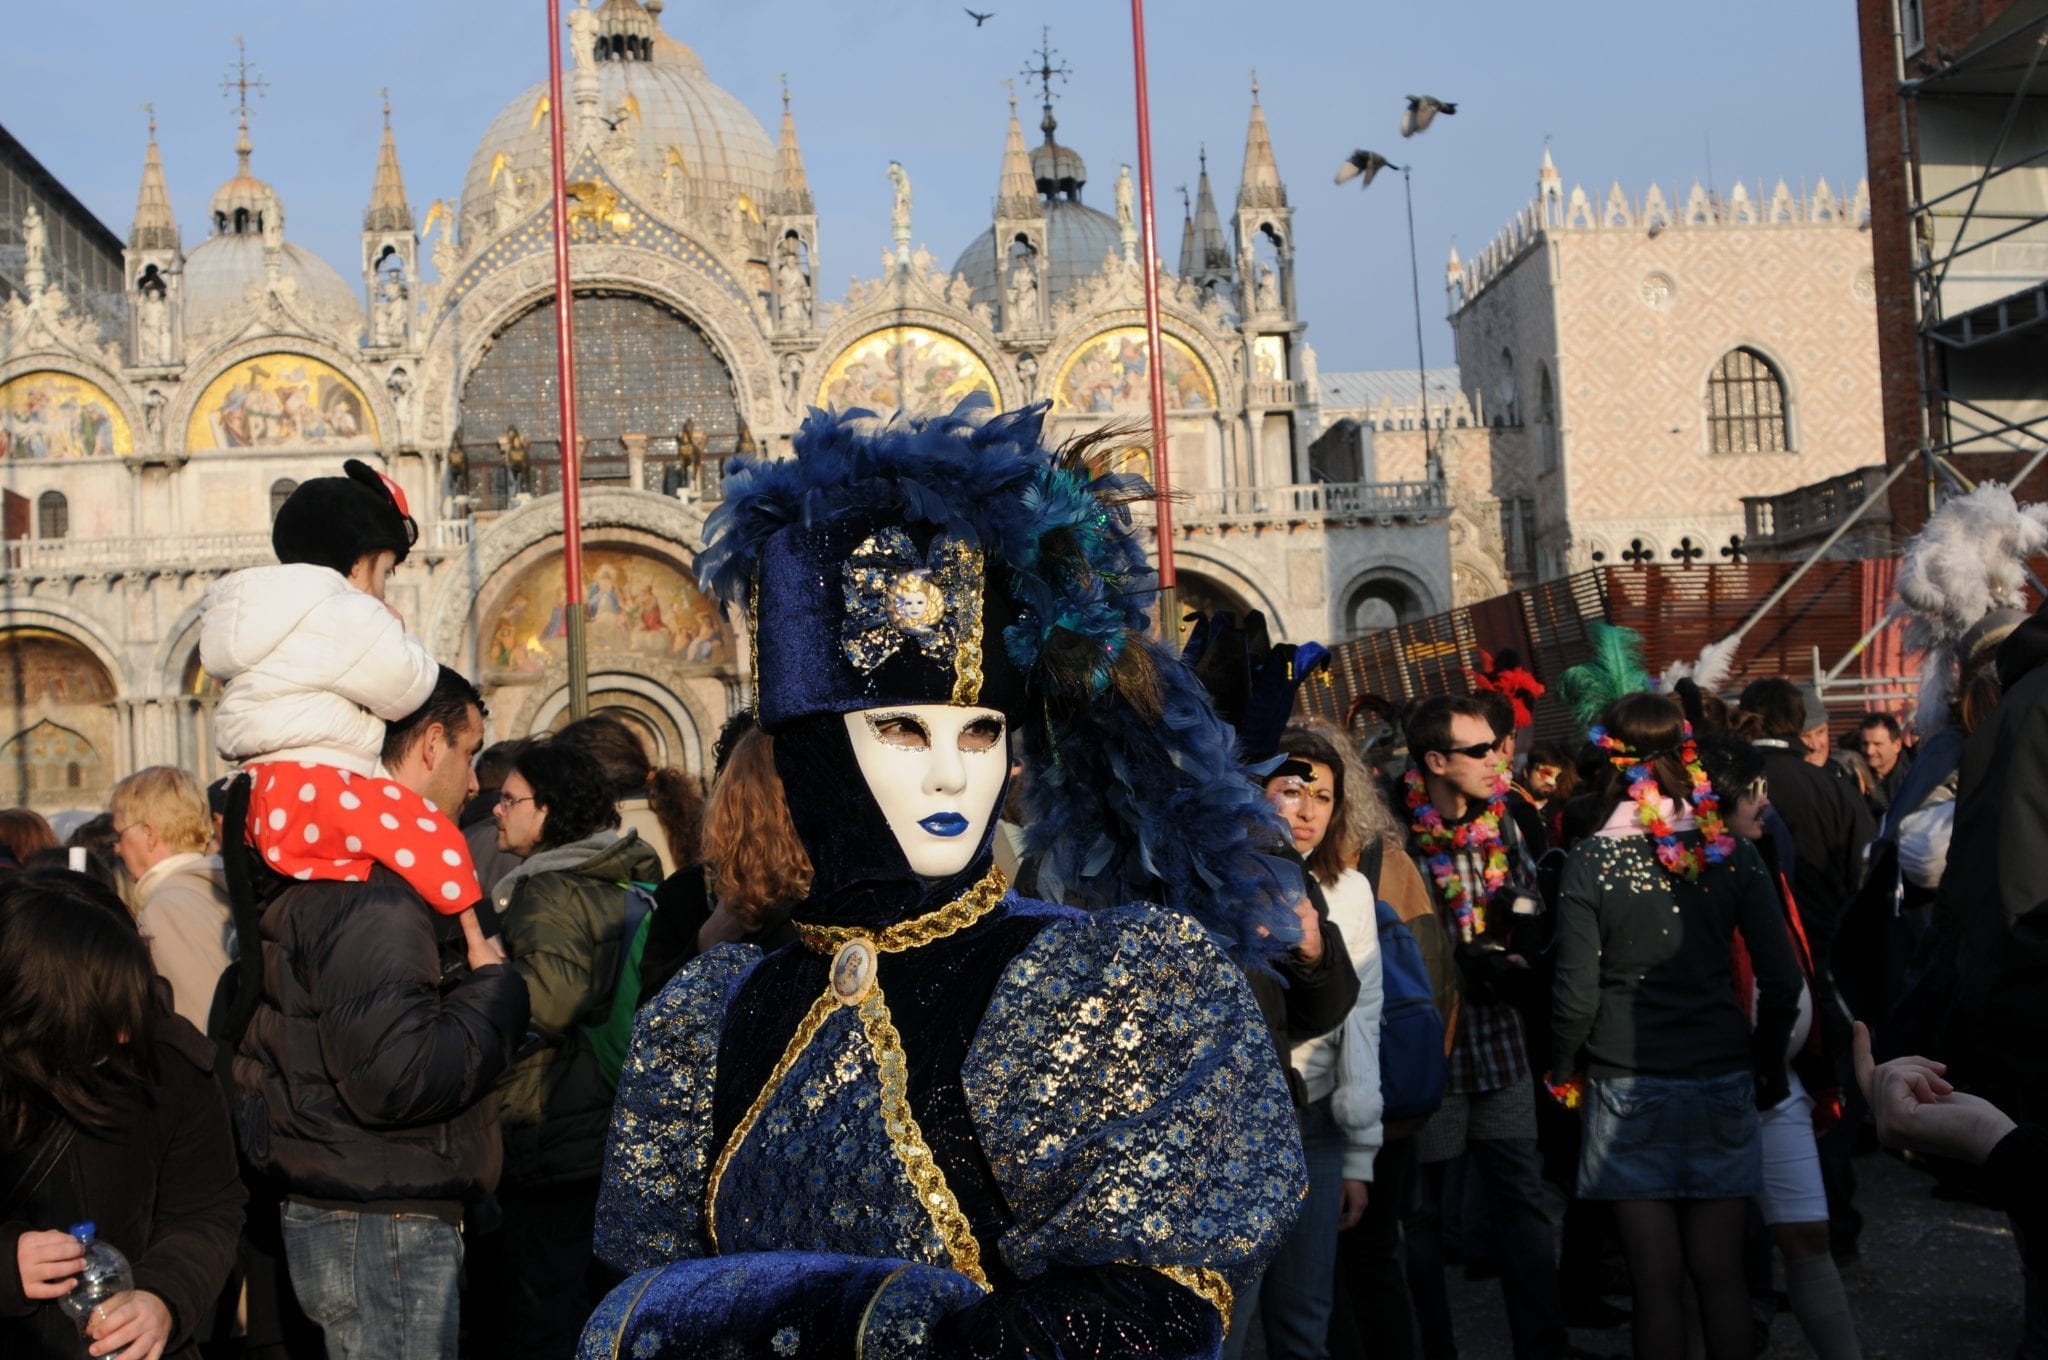 All About Carnival in Venice (Venetian Masks & More!) - Walks of Italy